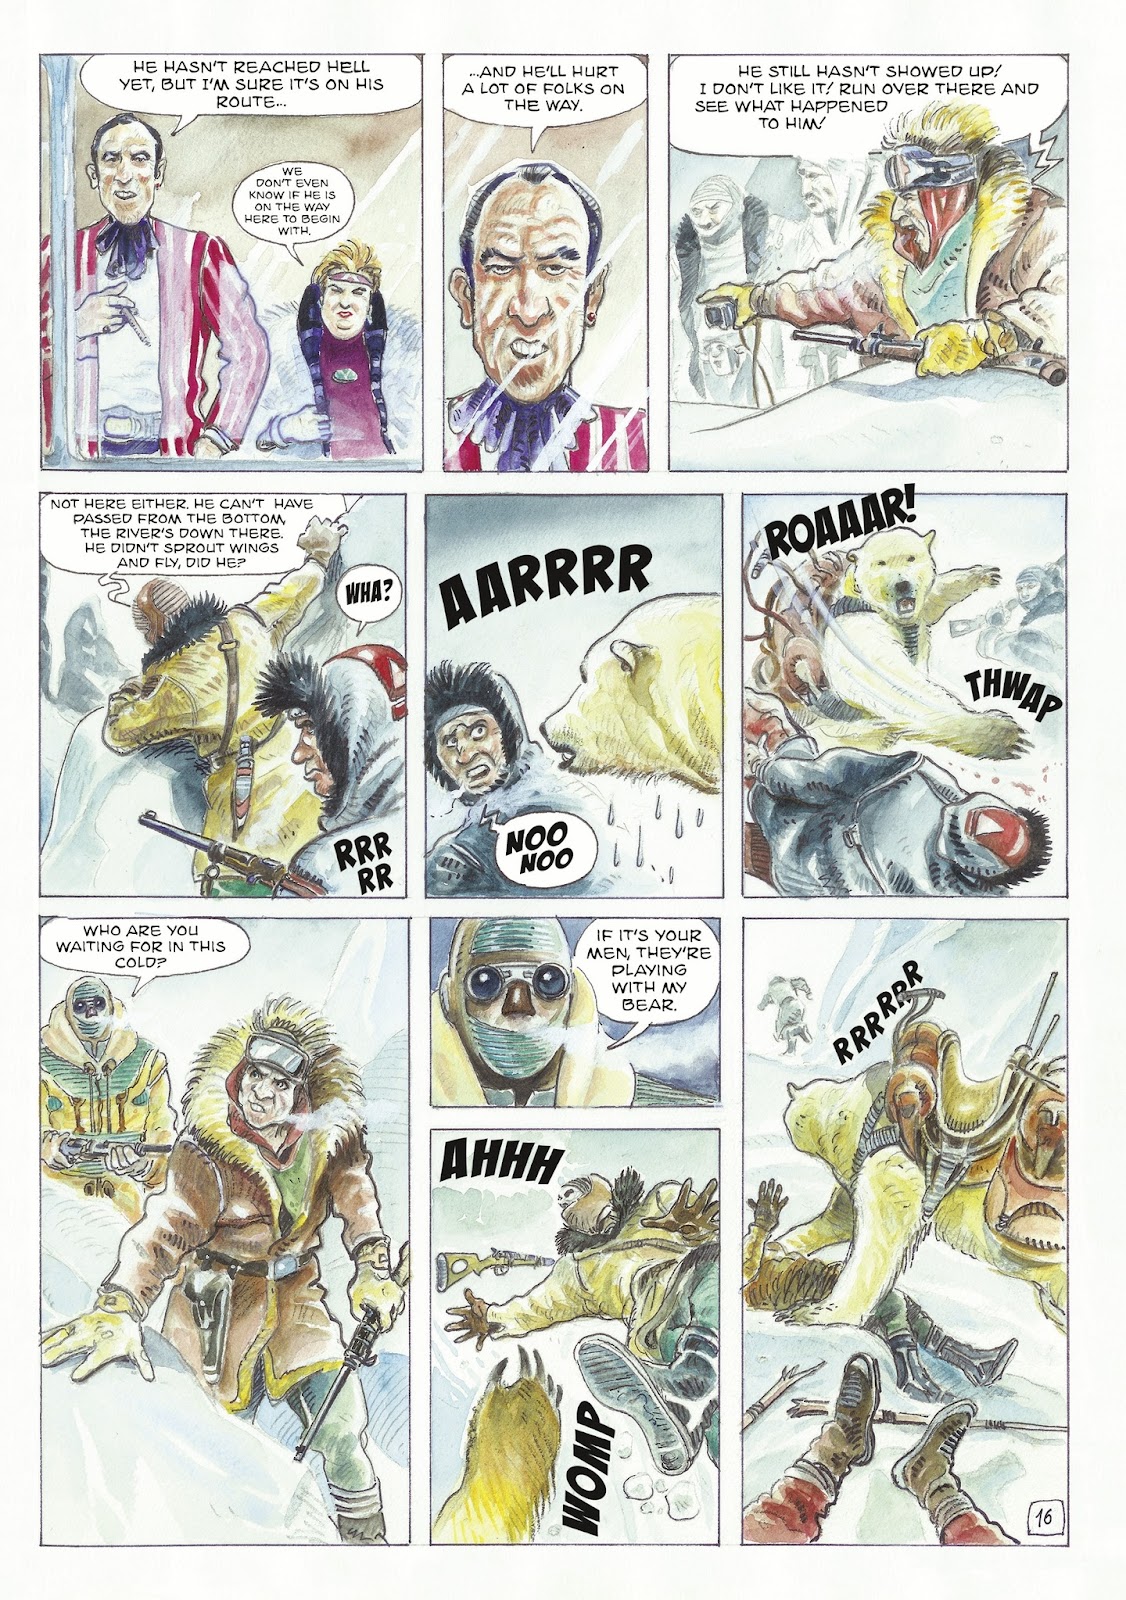 The Man With the Bear issue 1 - Page 18